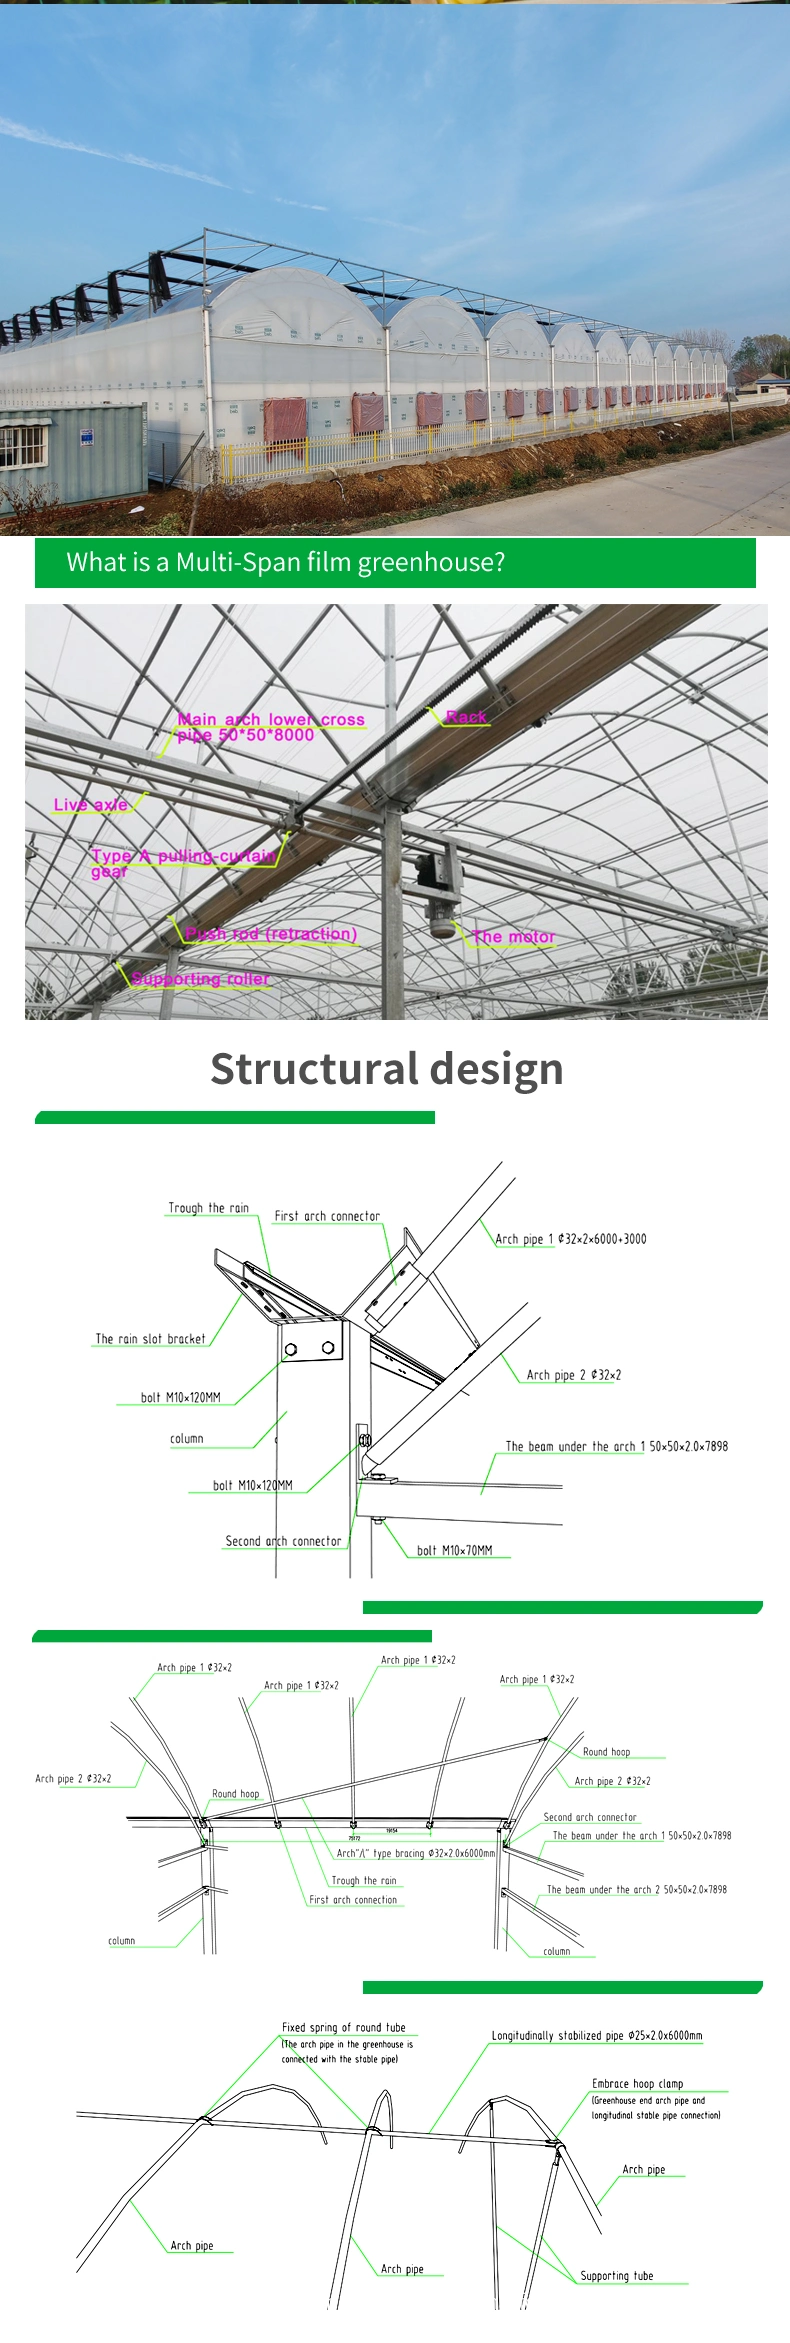 Customized Multi-Span Greenhouse for Agriculture Nft Systems and Vertical Vegetable Farming